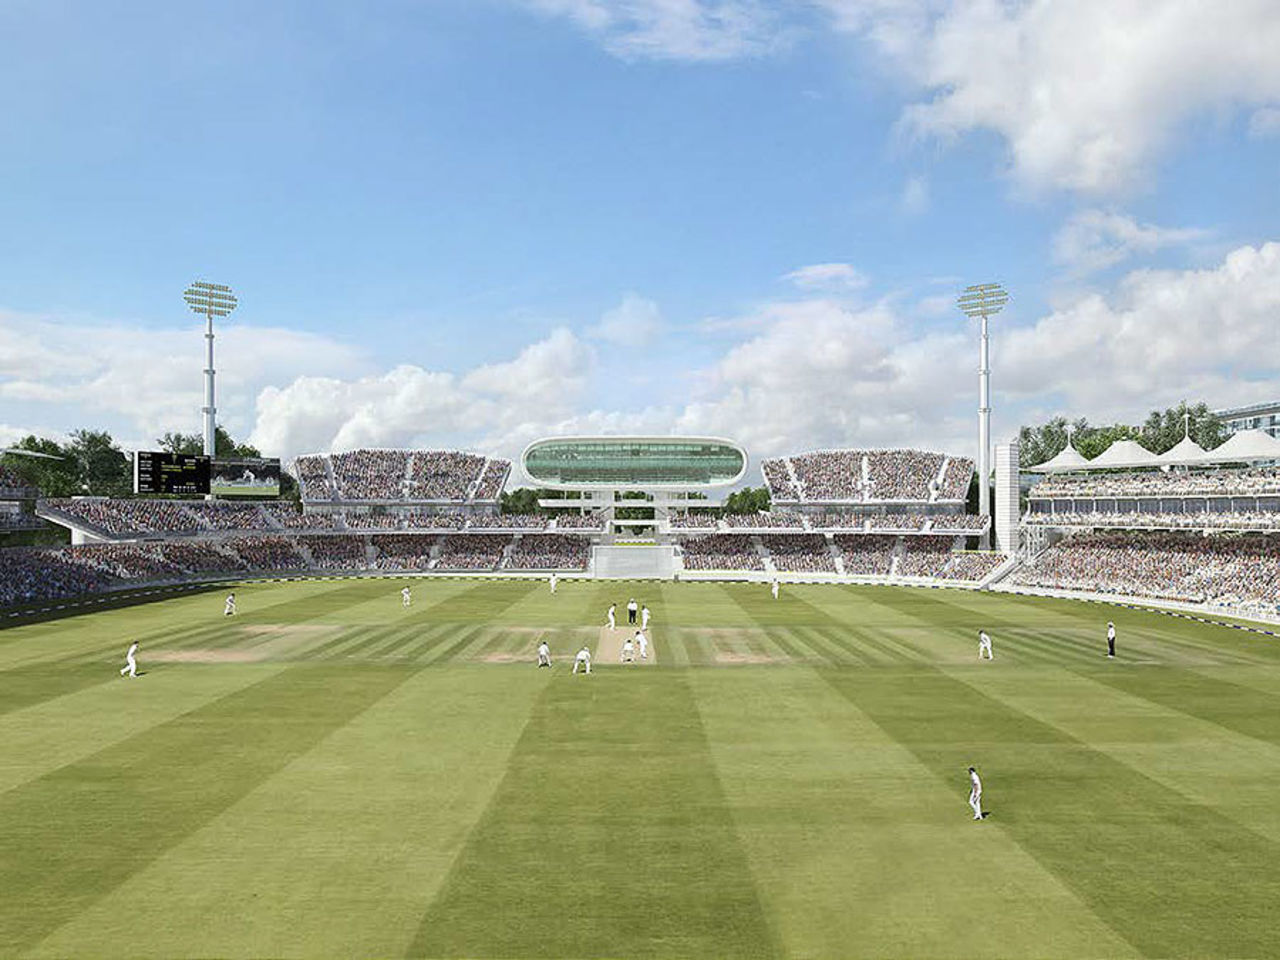 An artist's impression of the proposed redevelopment of the Nursery End at Lord's, June 9, 2017